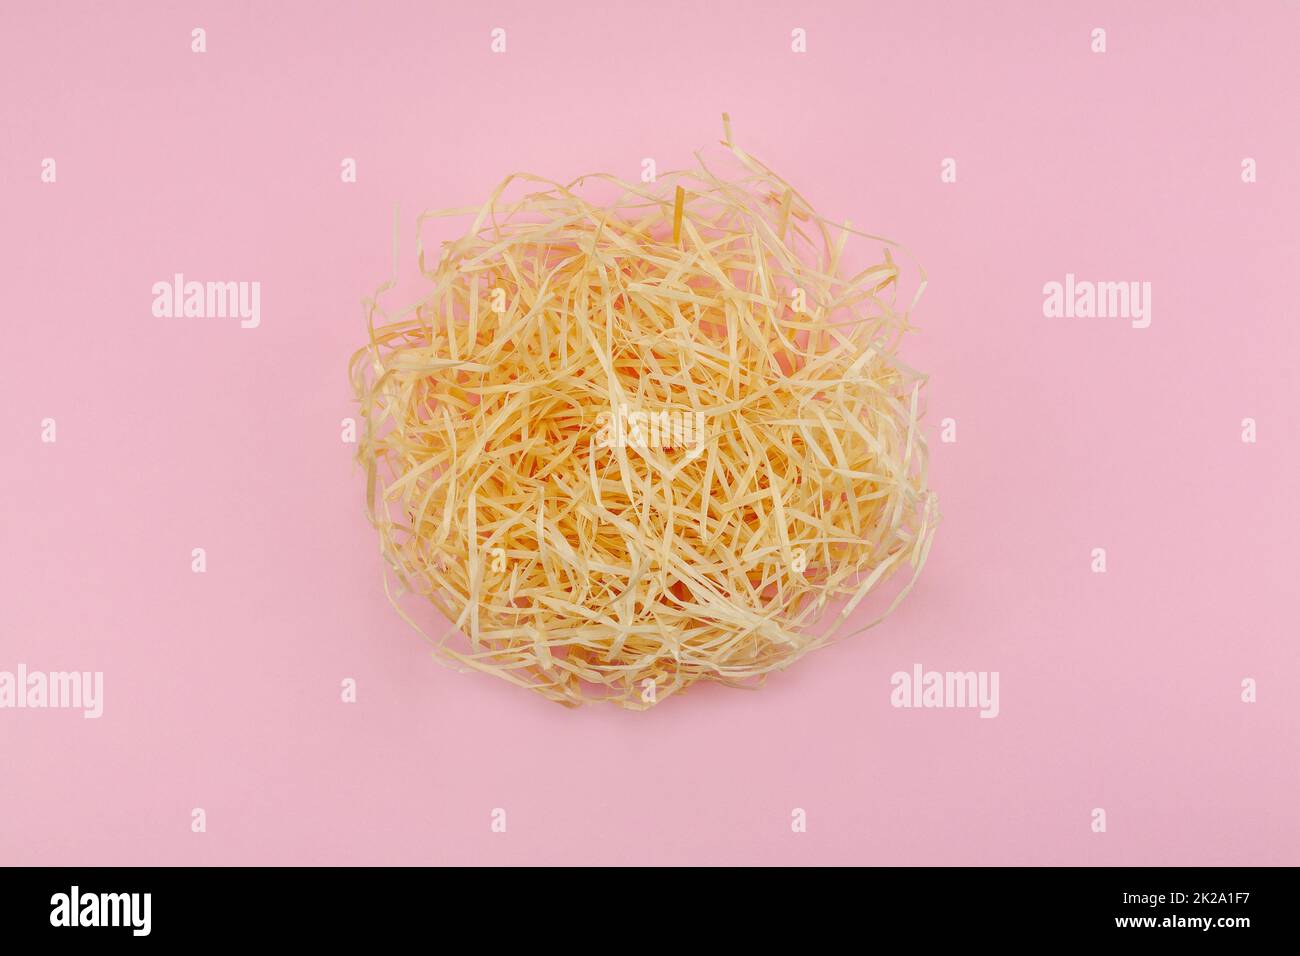 Creative flat lay concept. The love nest made of beige hay and one red heart is a symbol of love and the growth of love. Paradise pink background. Focus in the middle. Valentines or Easter idea. Stock Photo